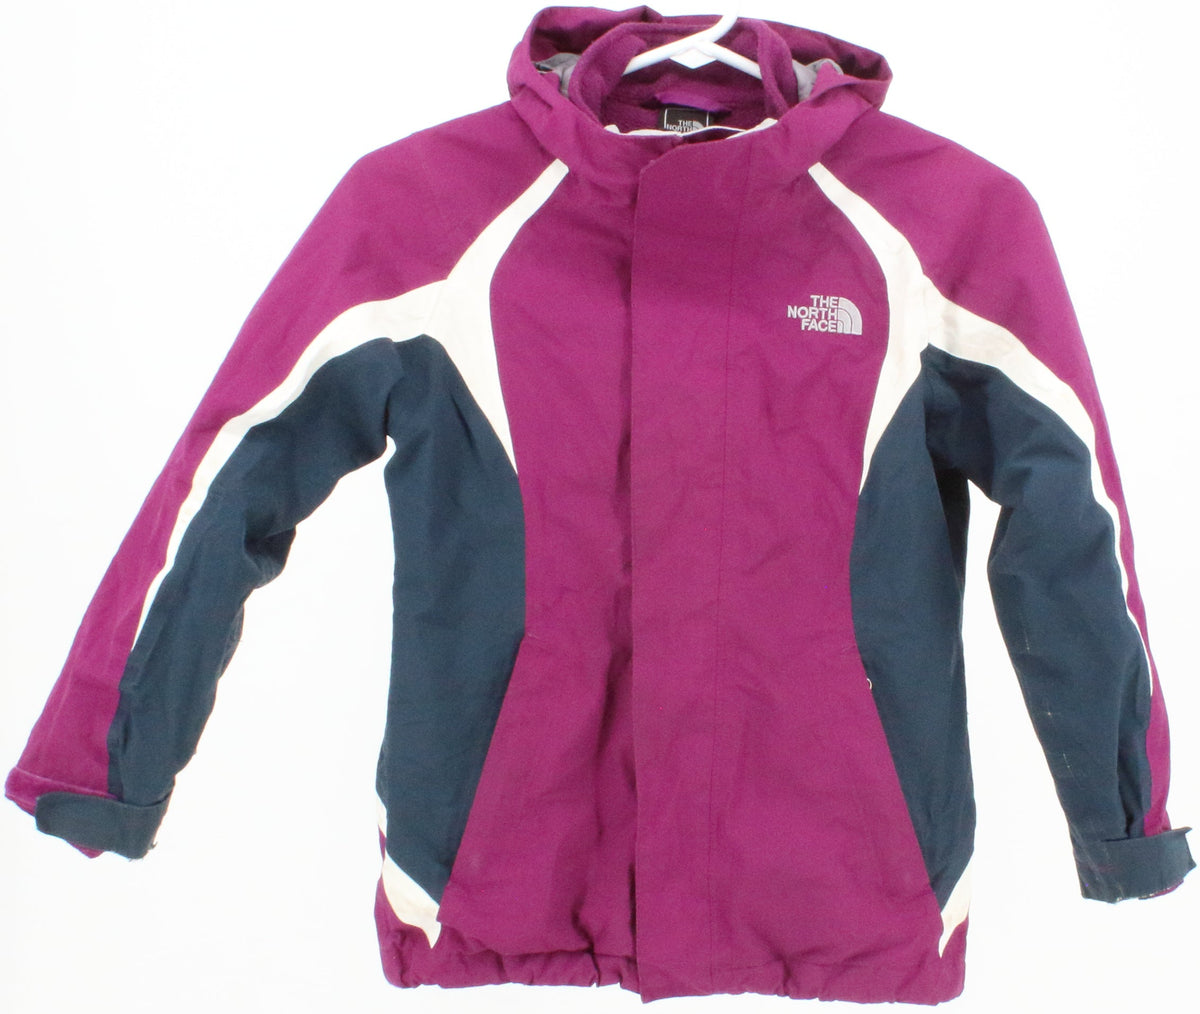 The North Face Girl's HyVent Pink and Blue Jacket